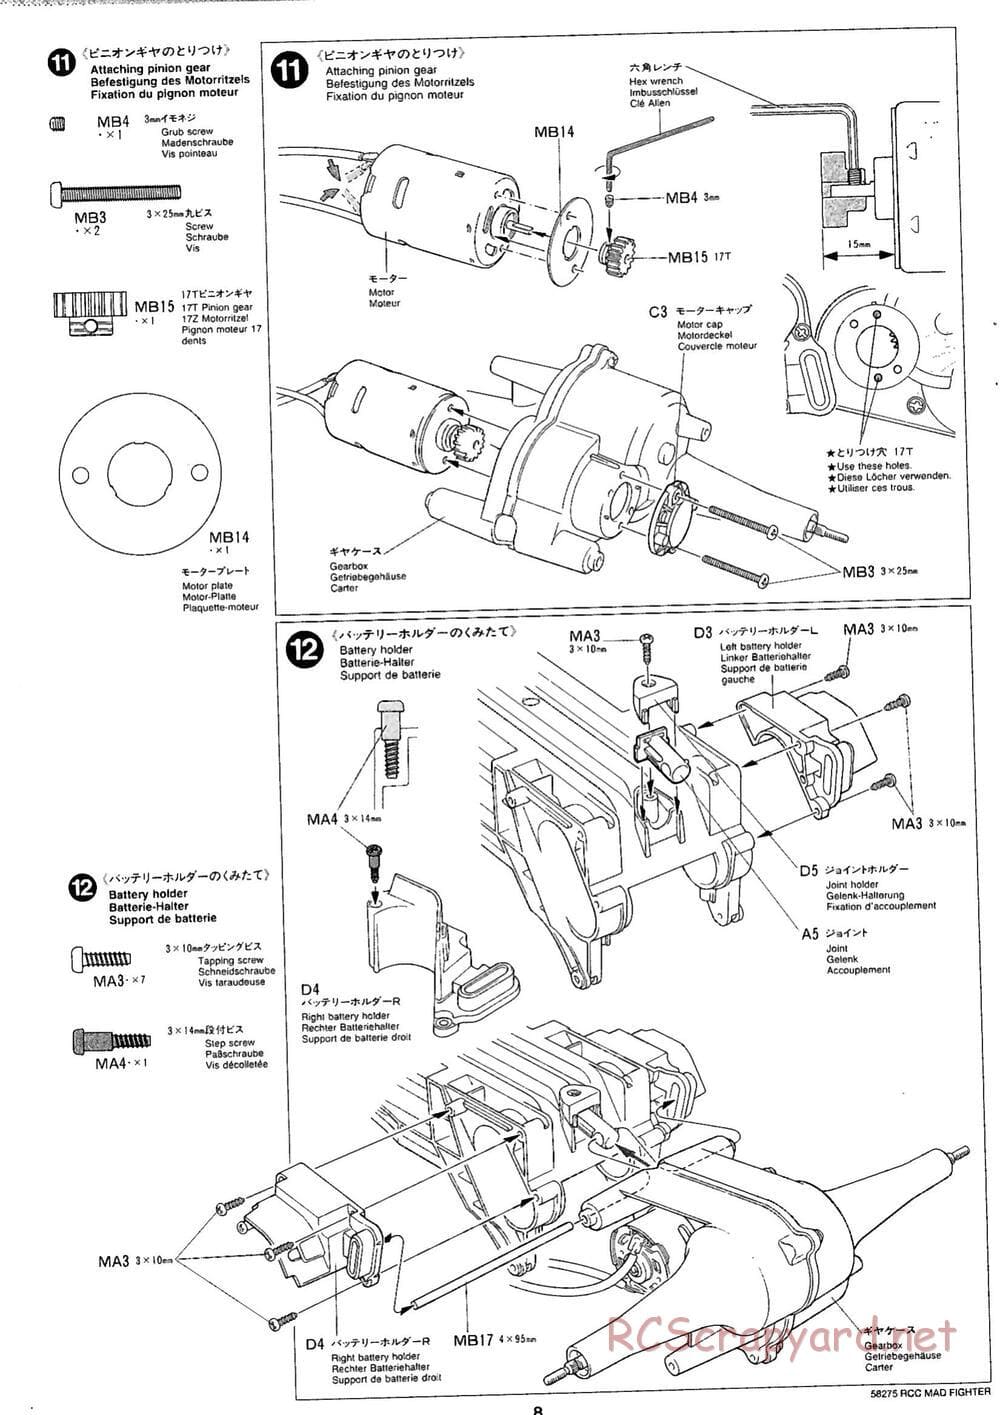 Tamiya - Mad Fighter Chassis - Manual - Page 8